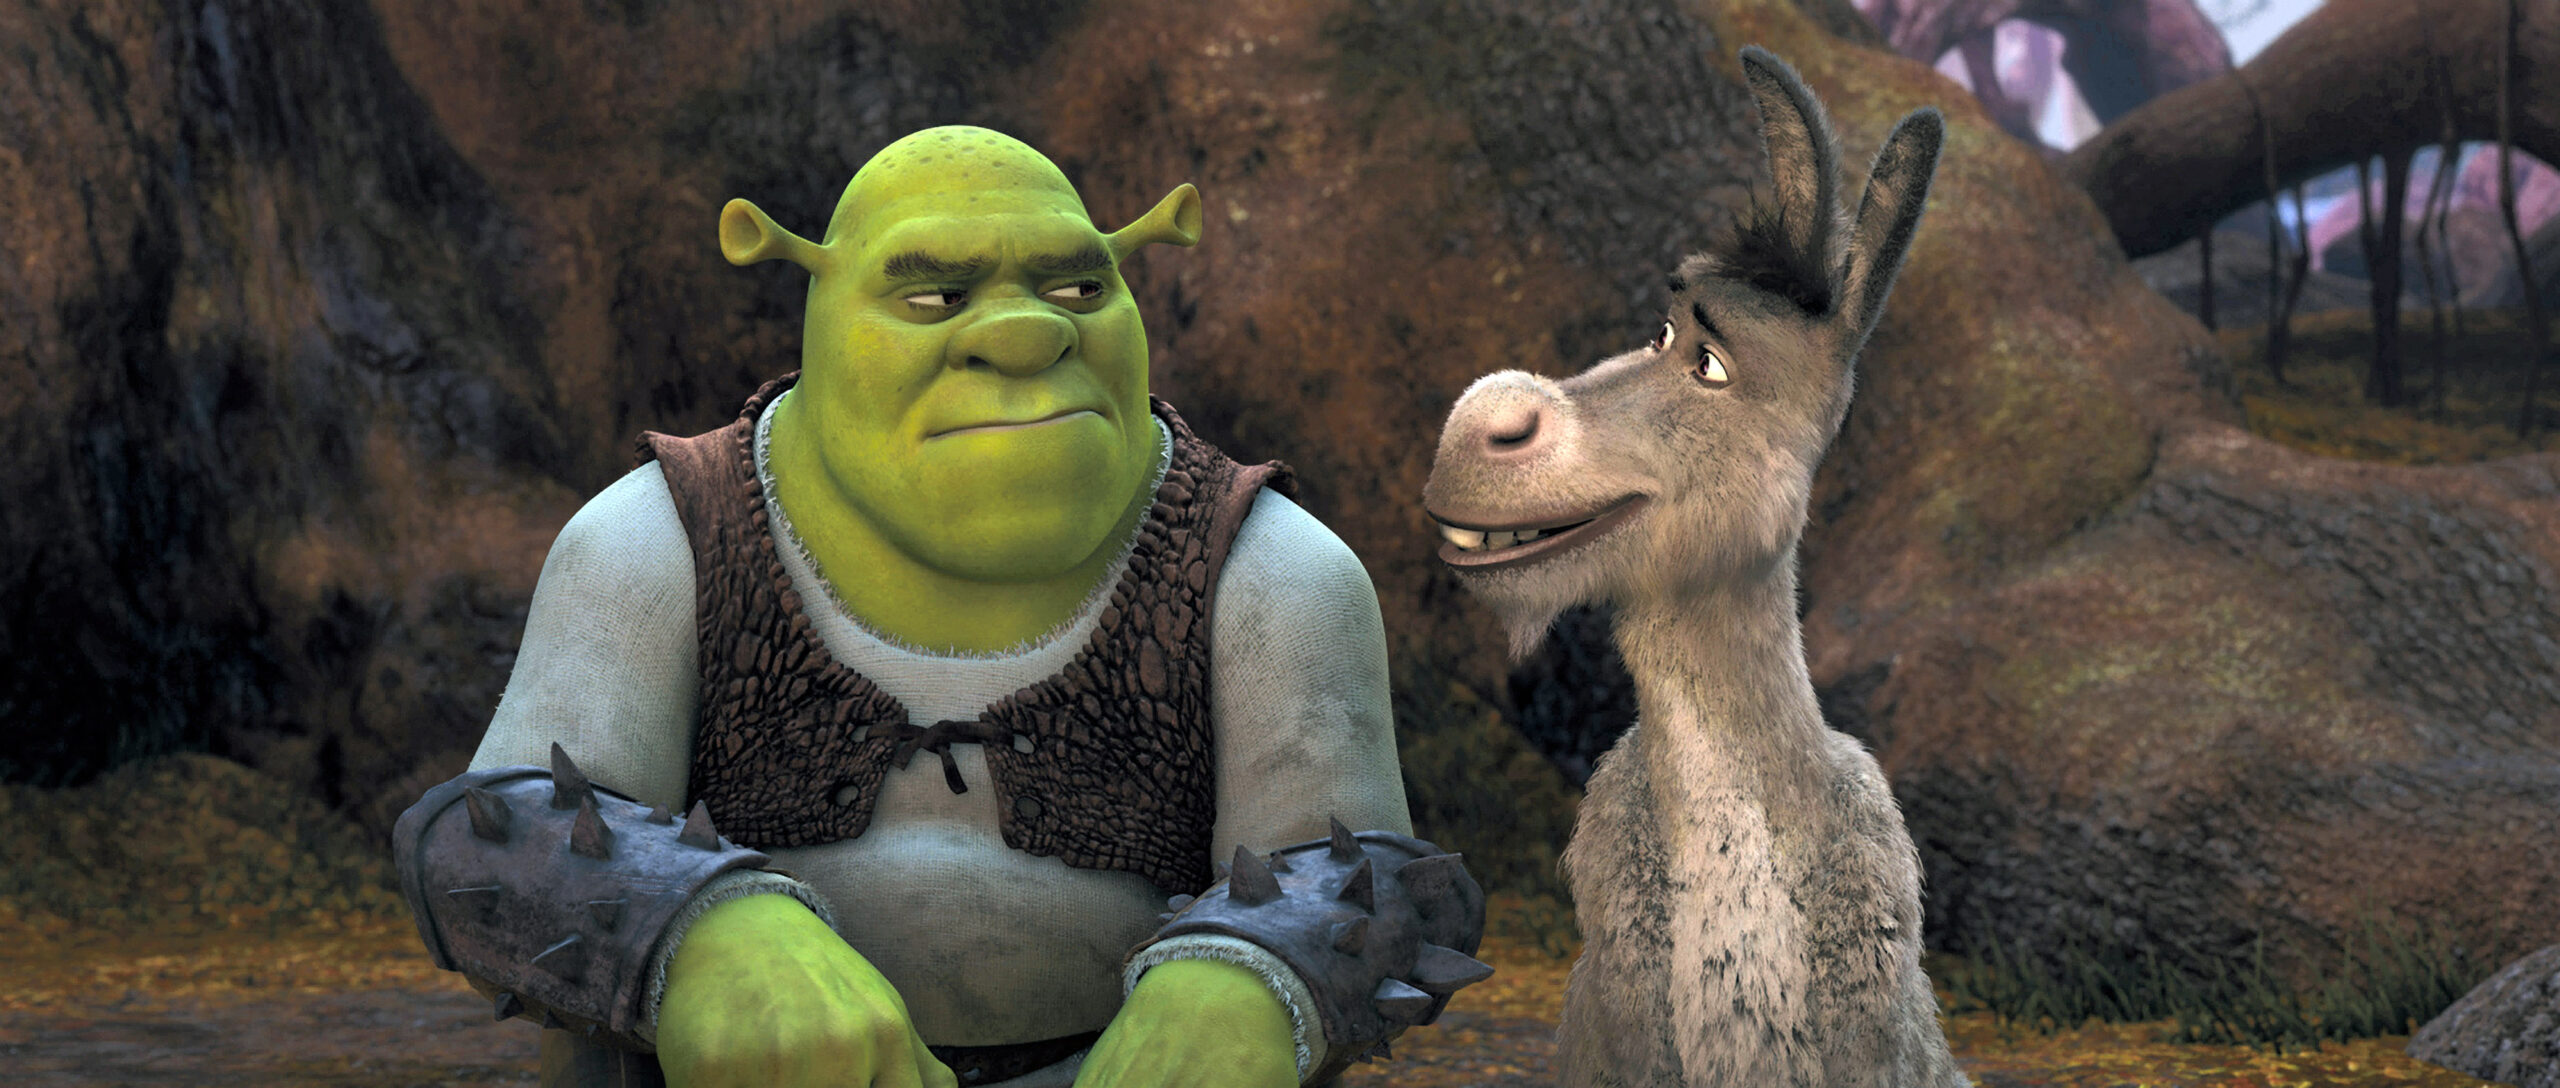 Eddie Murphy Confirms Shrek 5 Production and Donkey Spin-Off